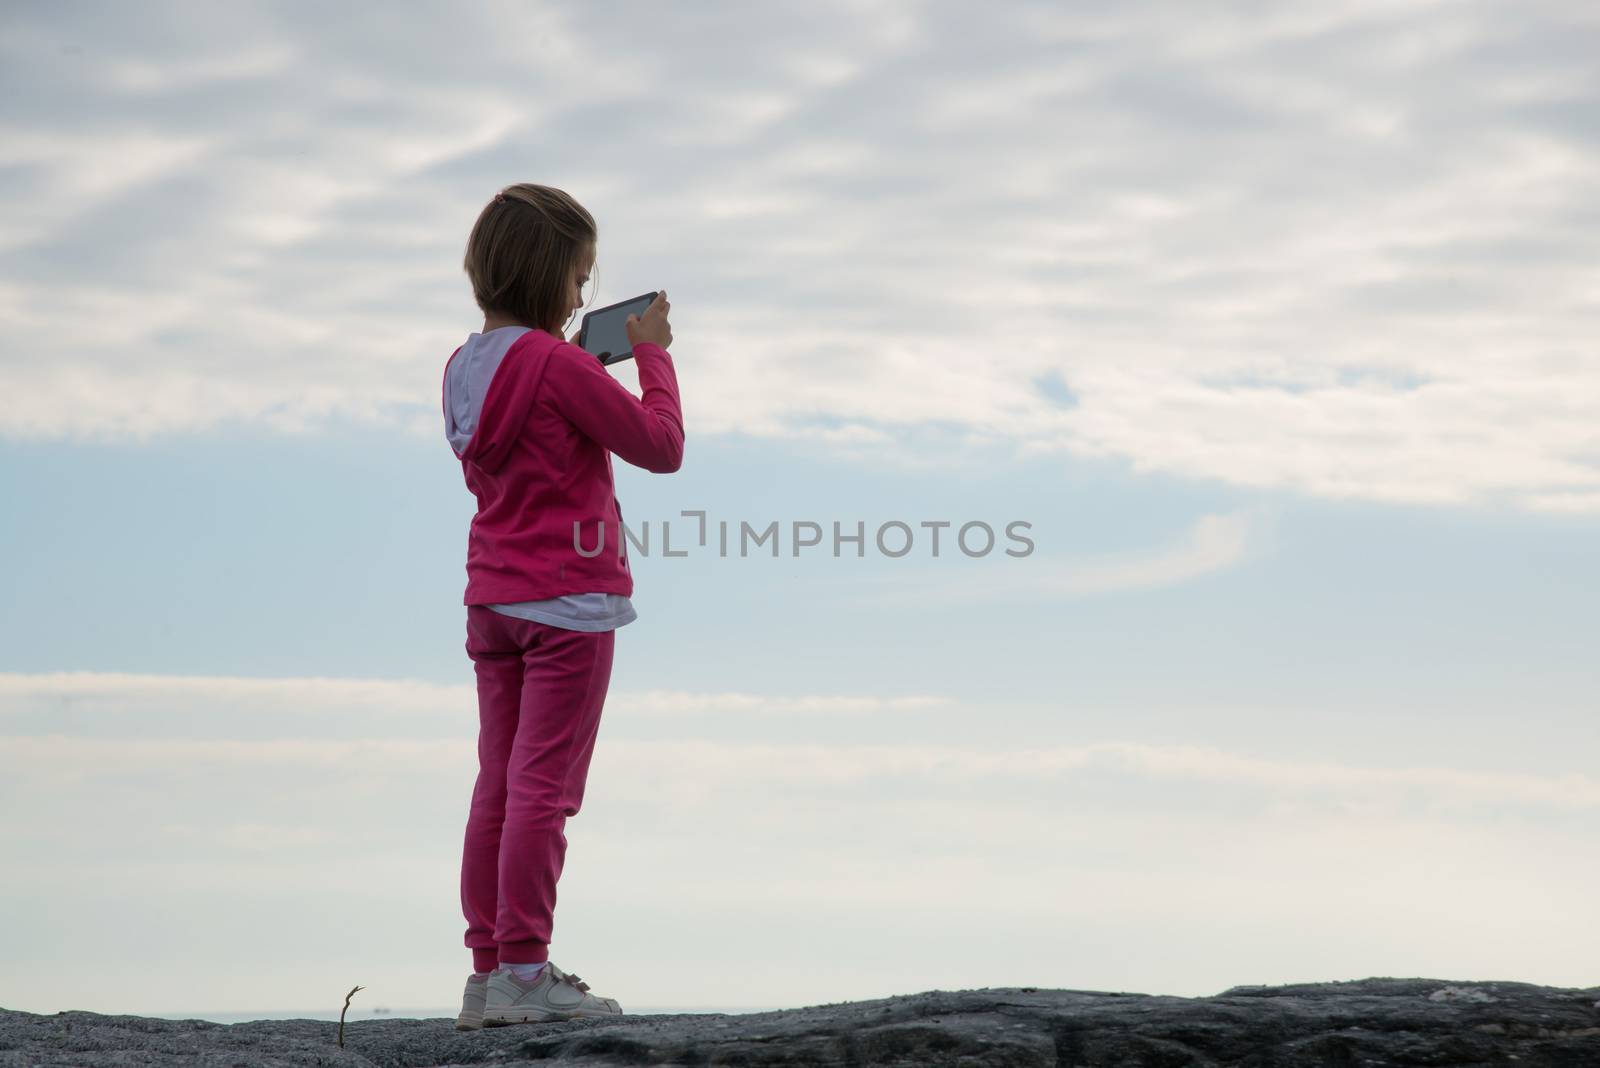 little girl with tablet photographer intent on photographing